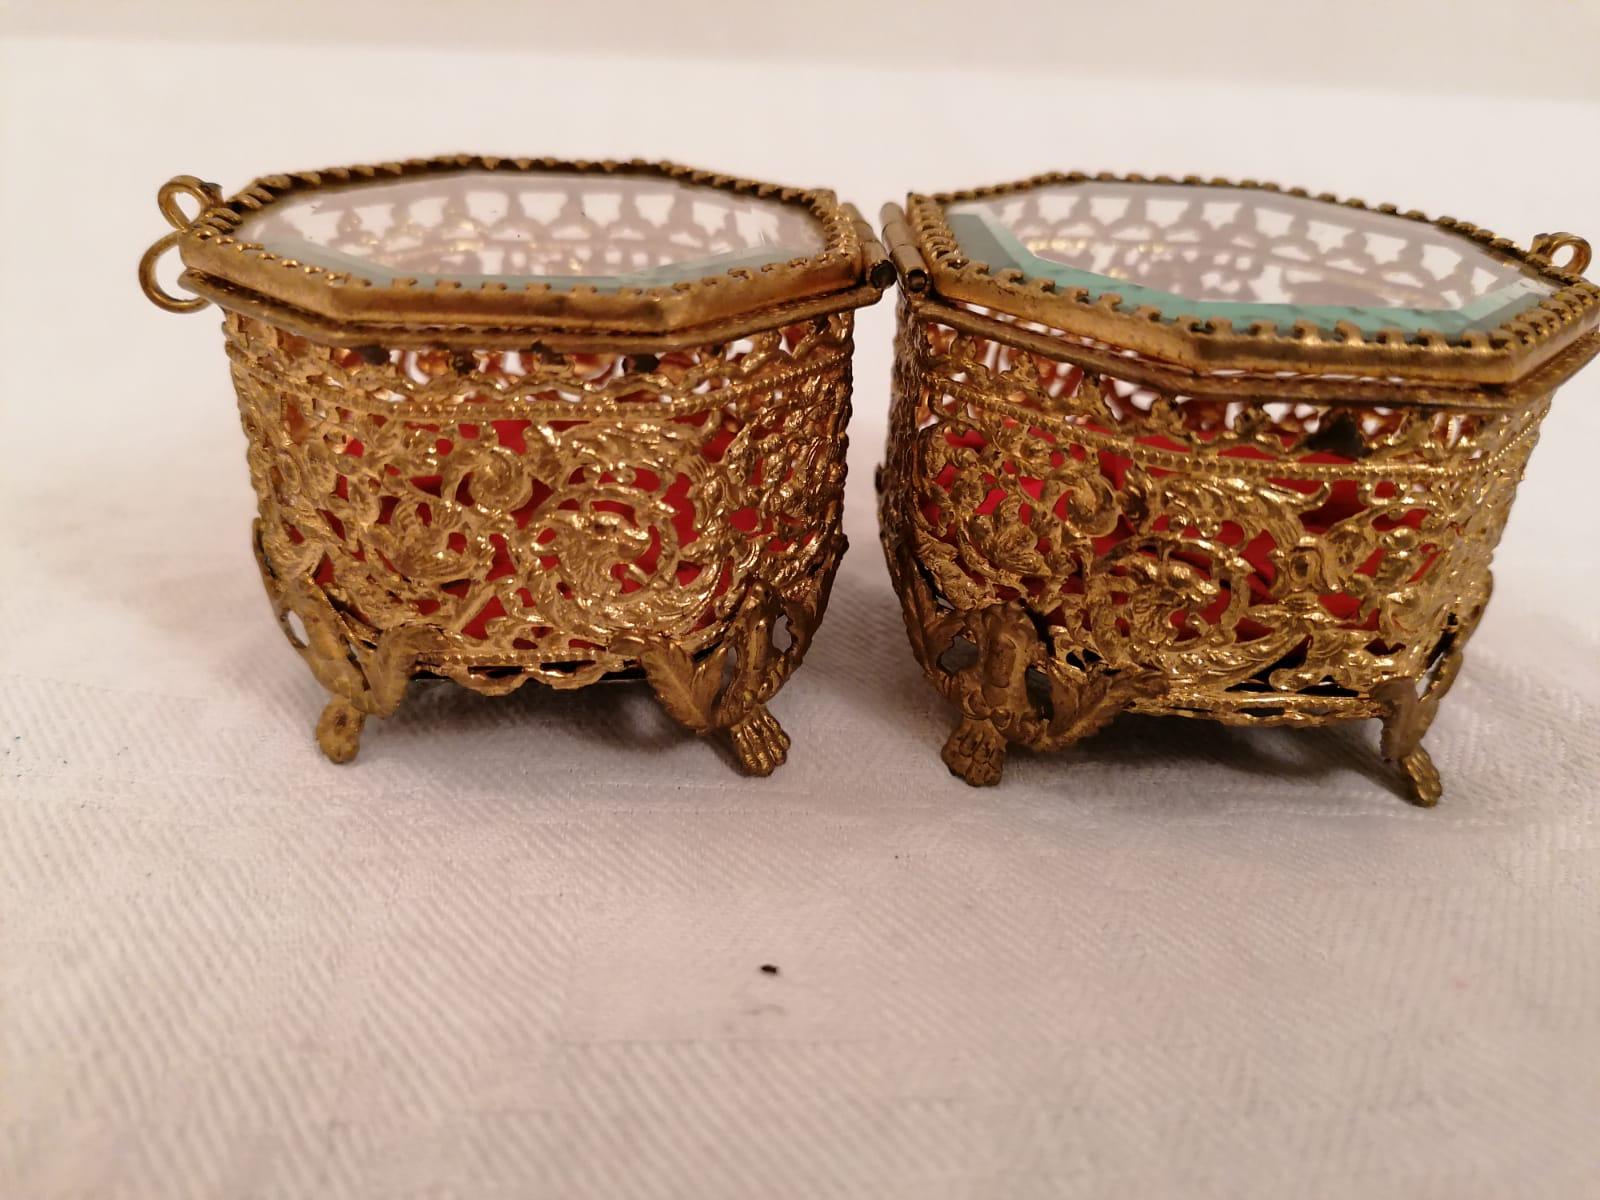 Glass and ormolu-mounted octagonal casket. Made in France in the 1860s.
Perfect original condition with a lovely patina.
Set of two.